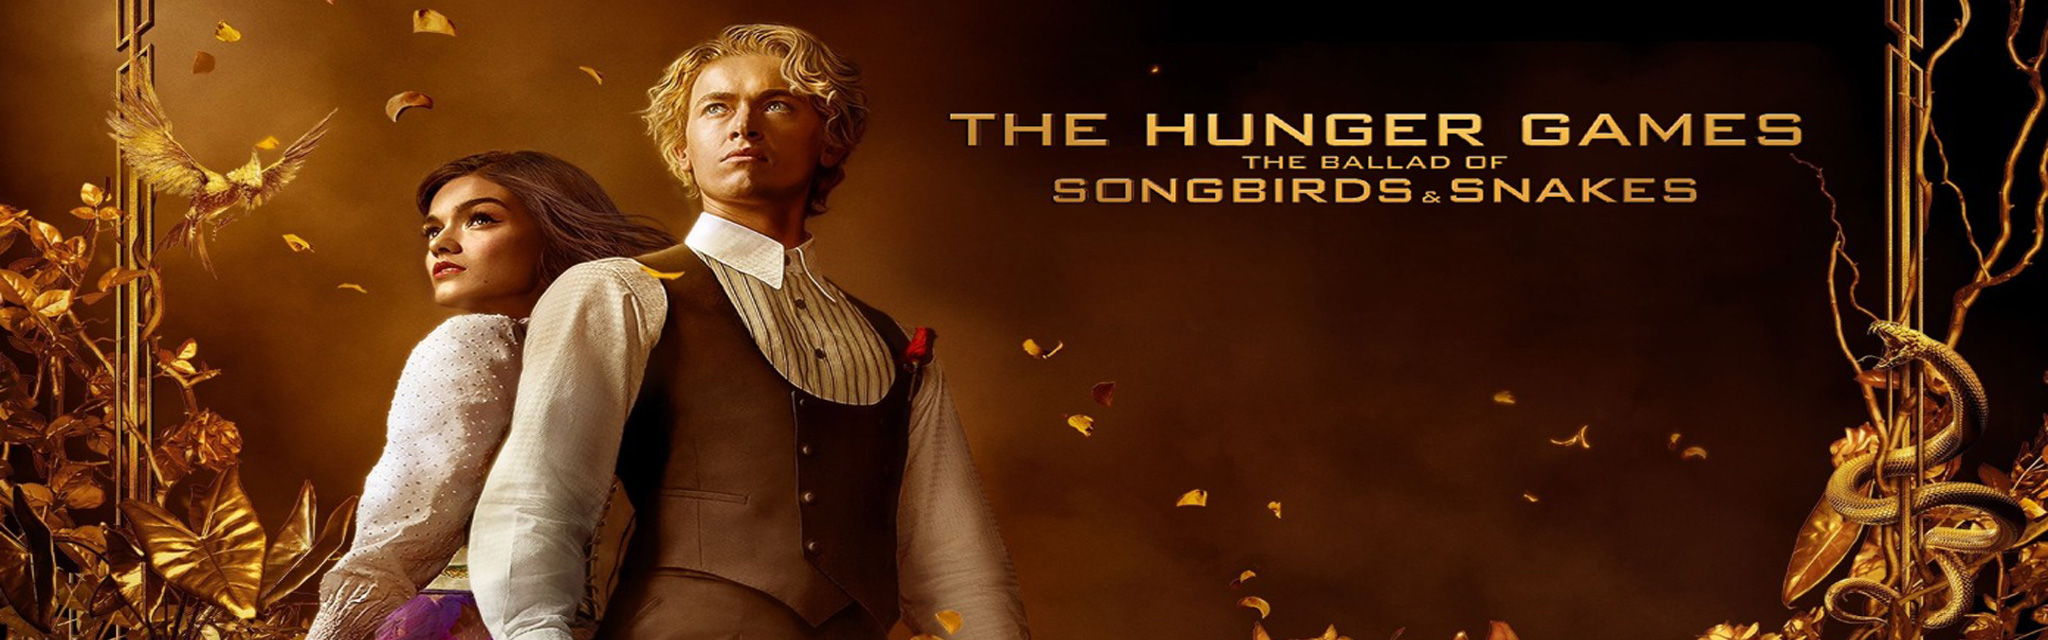  The Hunger Games The Ballad of Songbirds & Snakes